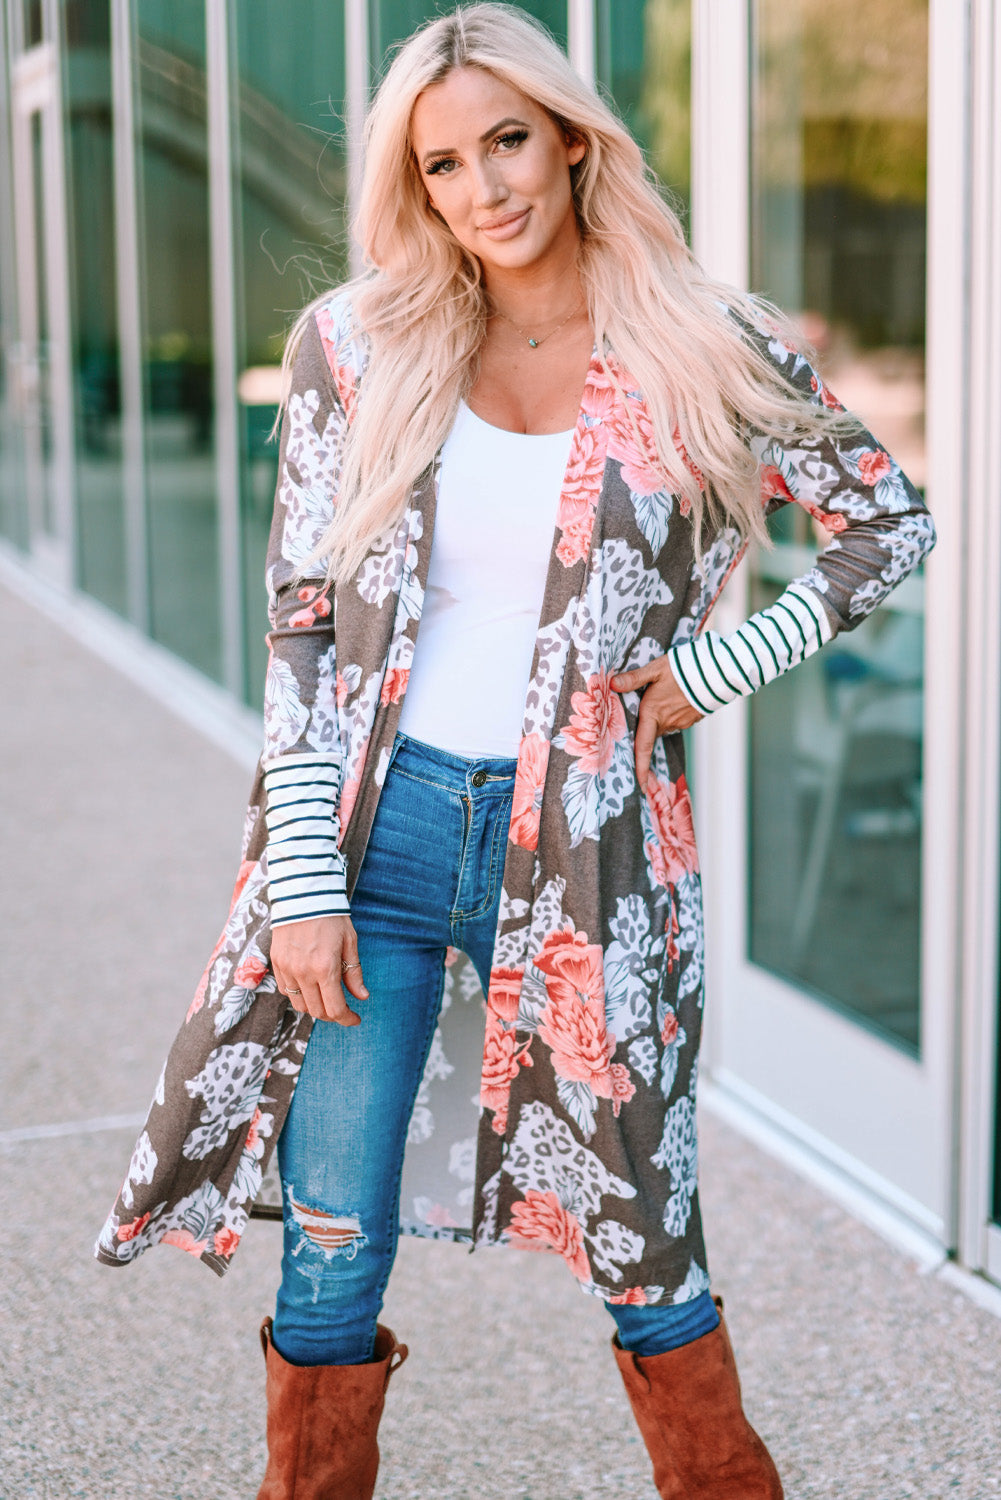 Stripe Detail Sleeve Floral Print Cardigan - Floral / S - Women’s Clothing & Accessories - Shirts & Tops - 1 - 2024